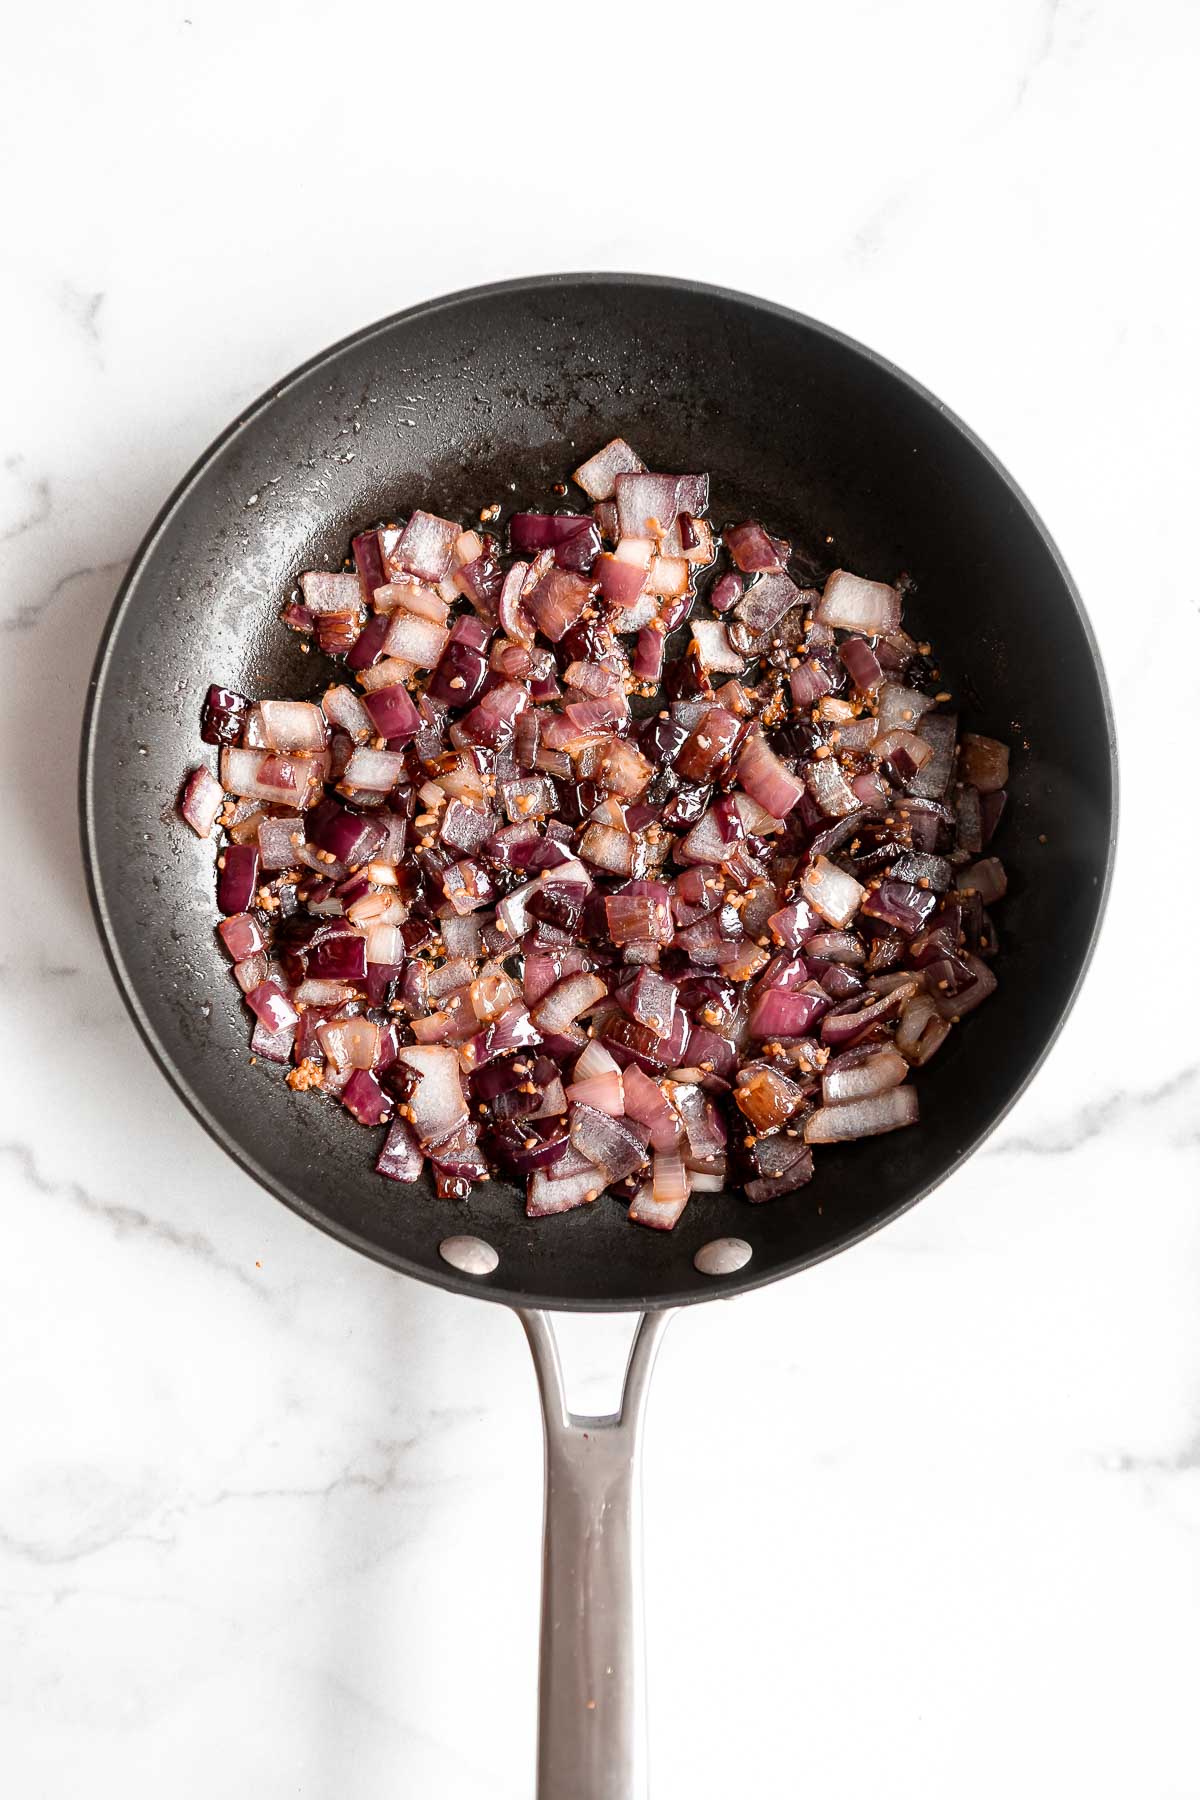 sauteed onion in a skillet